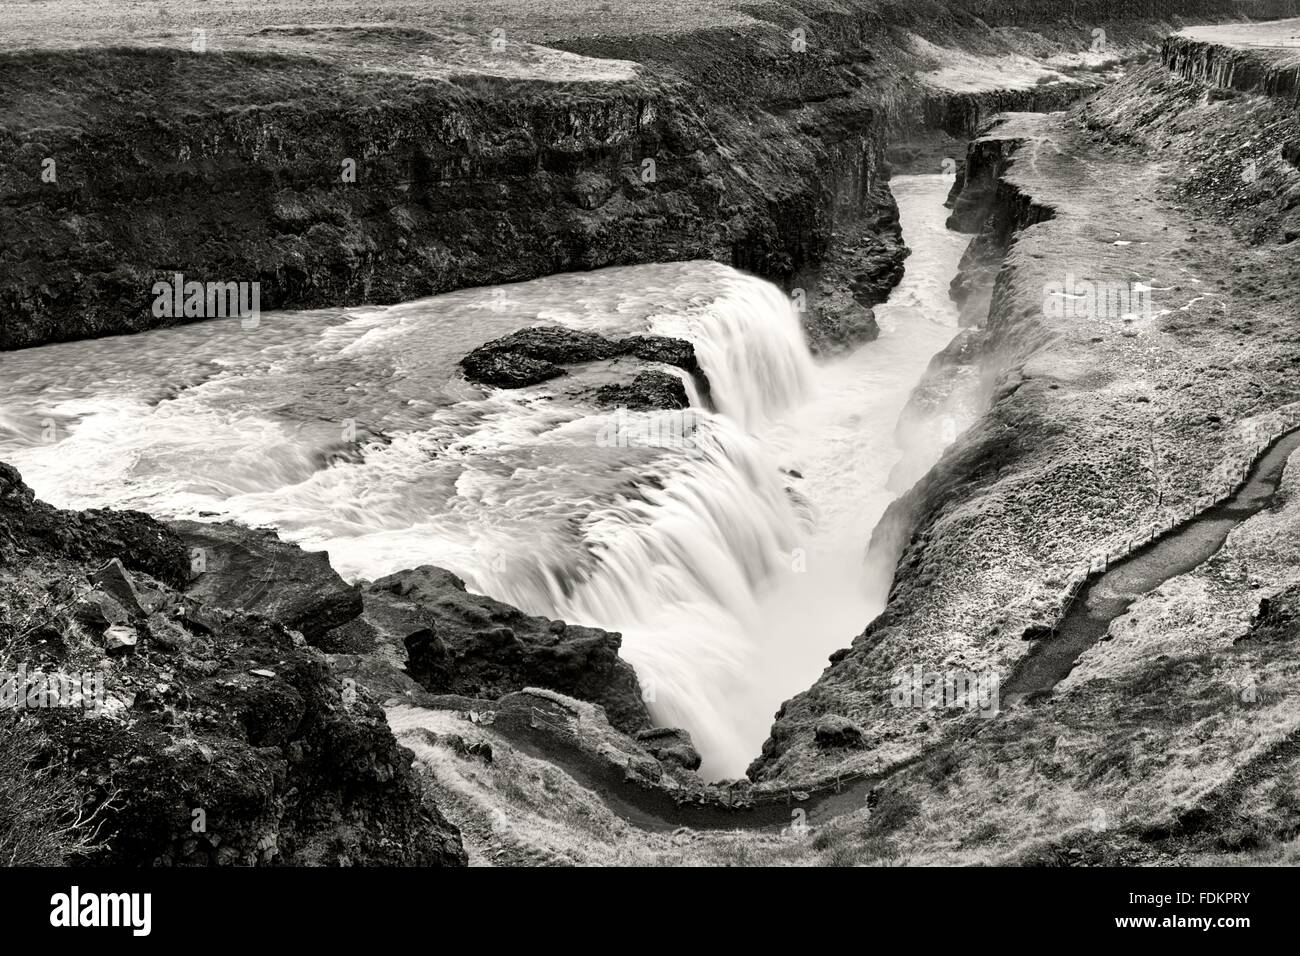 Gullfoss Waterfall in Iceland, part of the Golden Circle tourist route on the volcanic island. Stock Photo